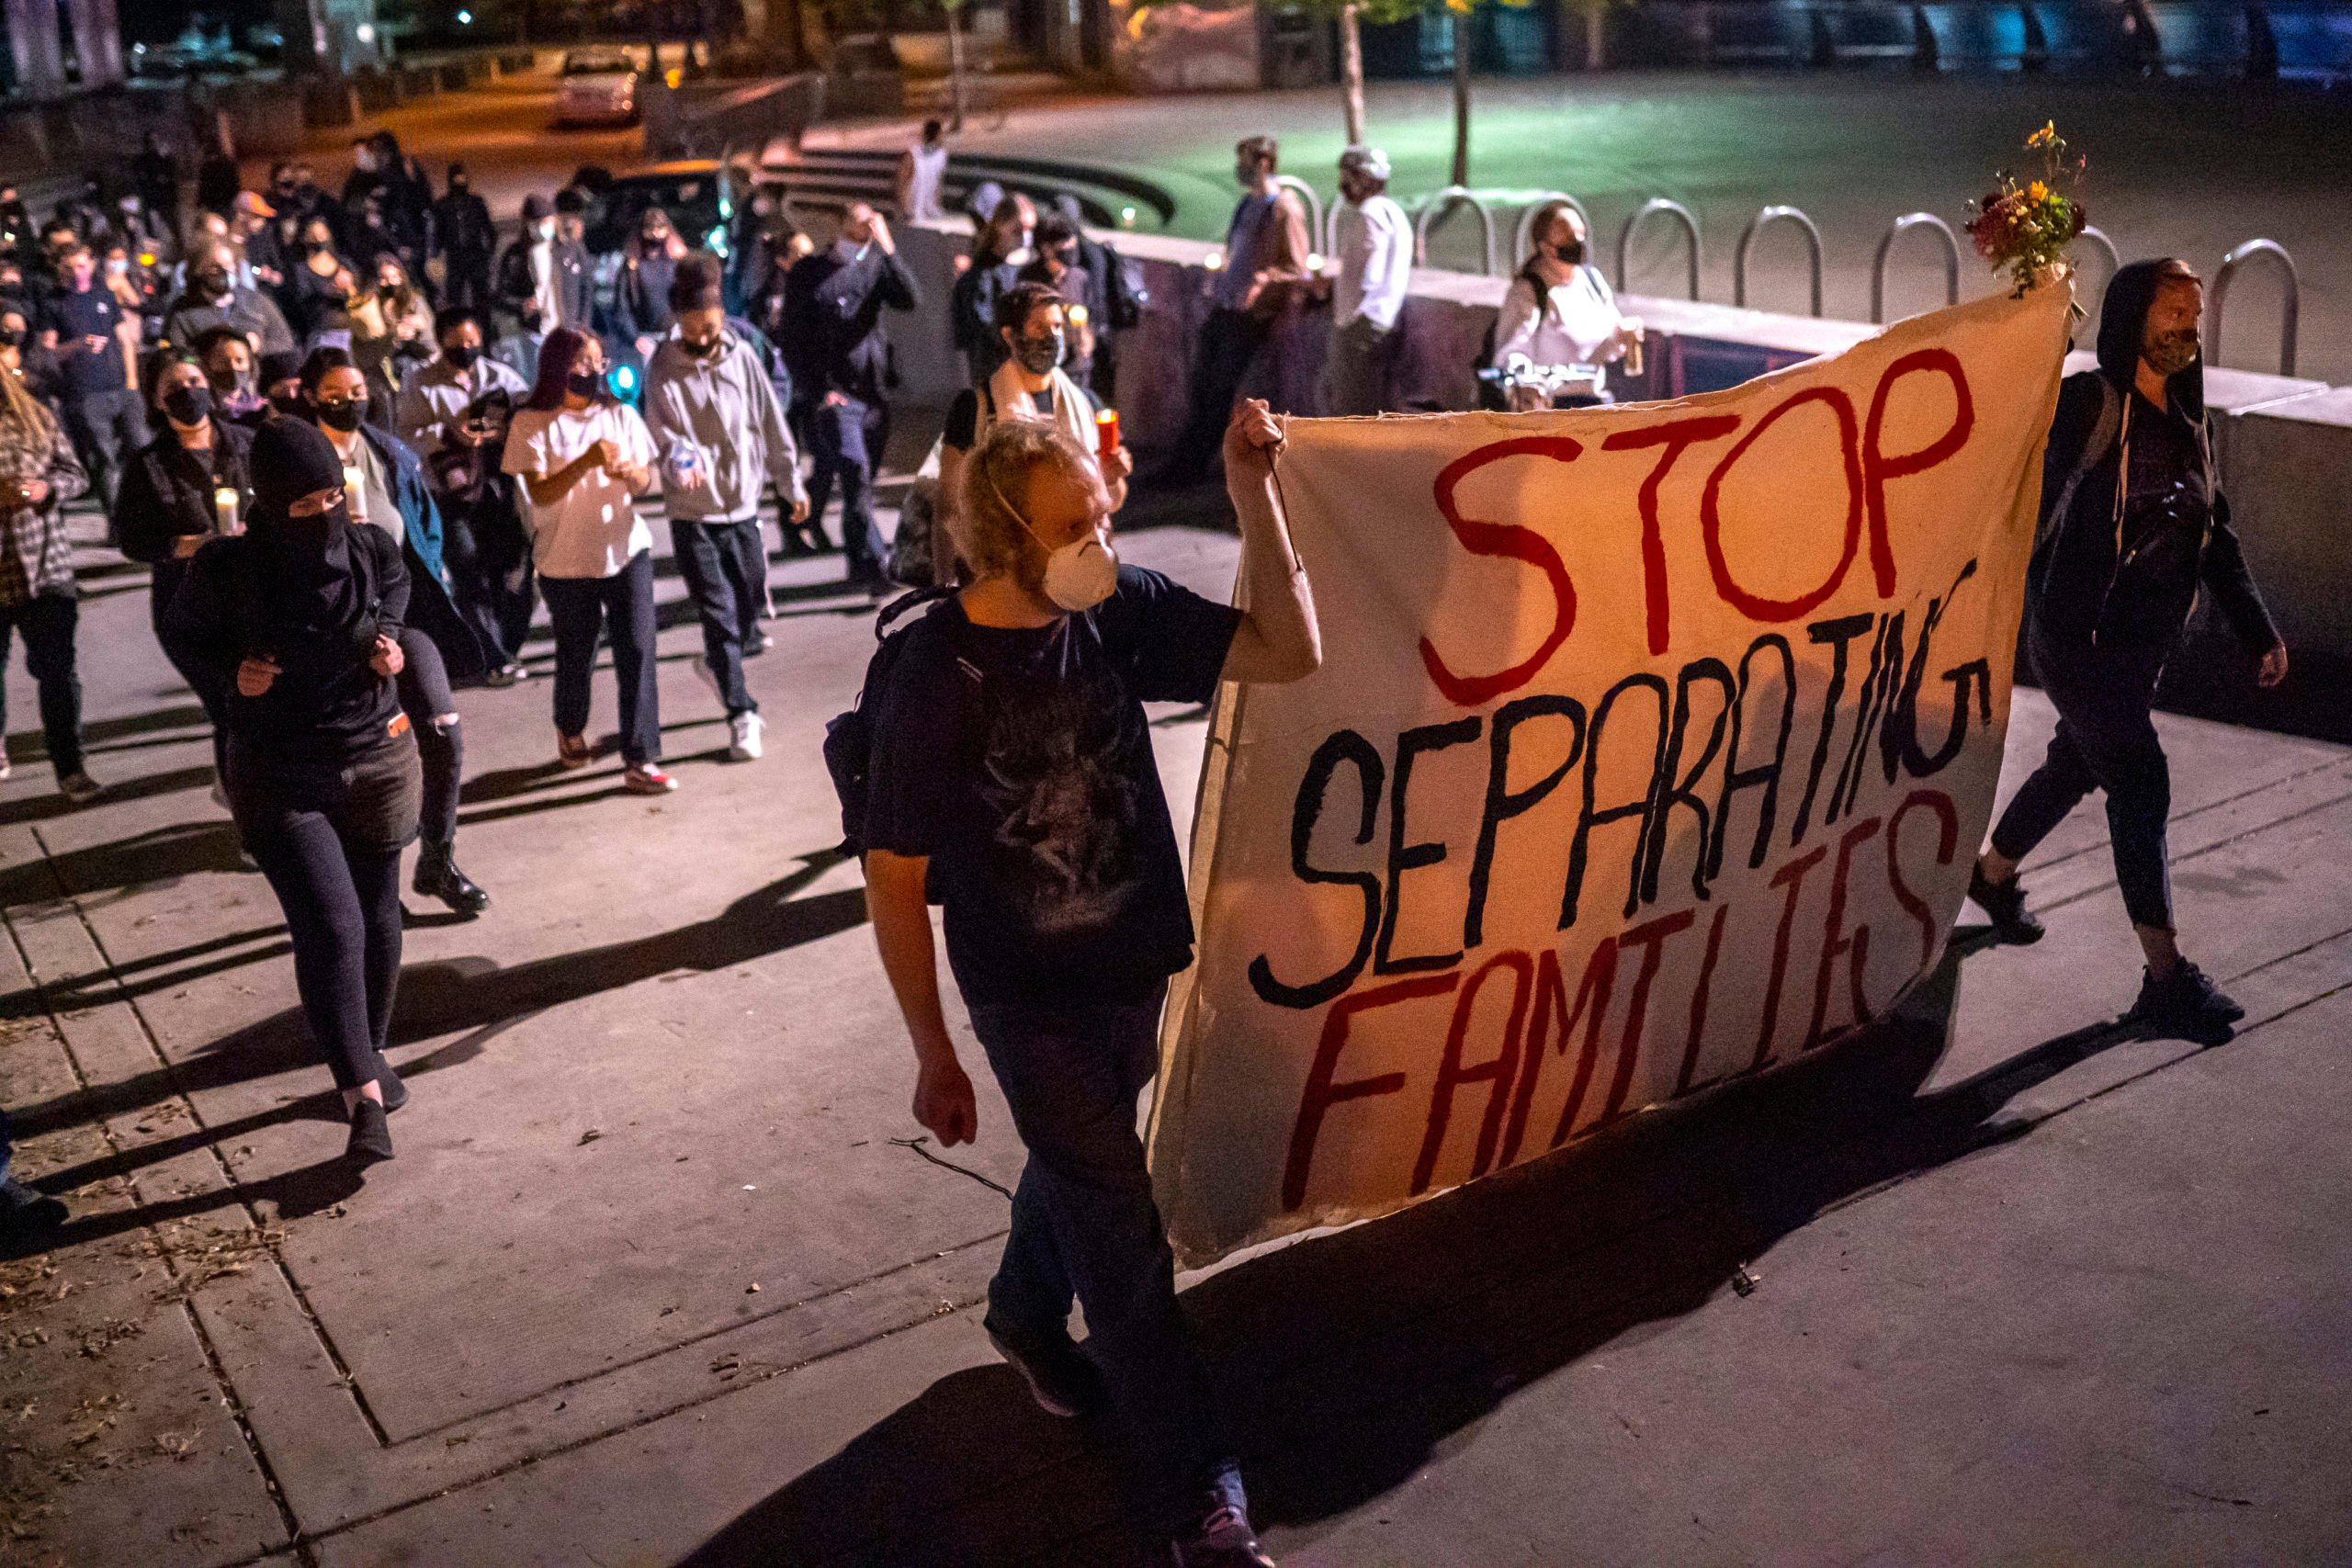 Activists march along the waterfront during a protest against the Immigration and Customs Enforcement agency on Oct. 3 in Portland, Oregon. (Nathan Howard/Getty Images)